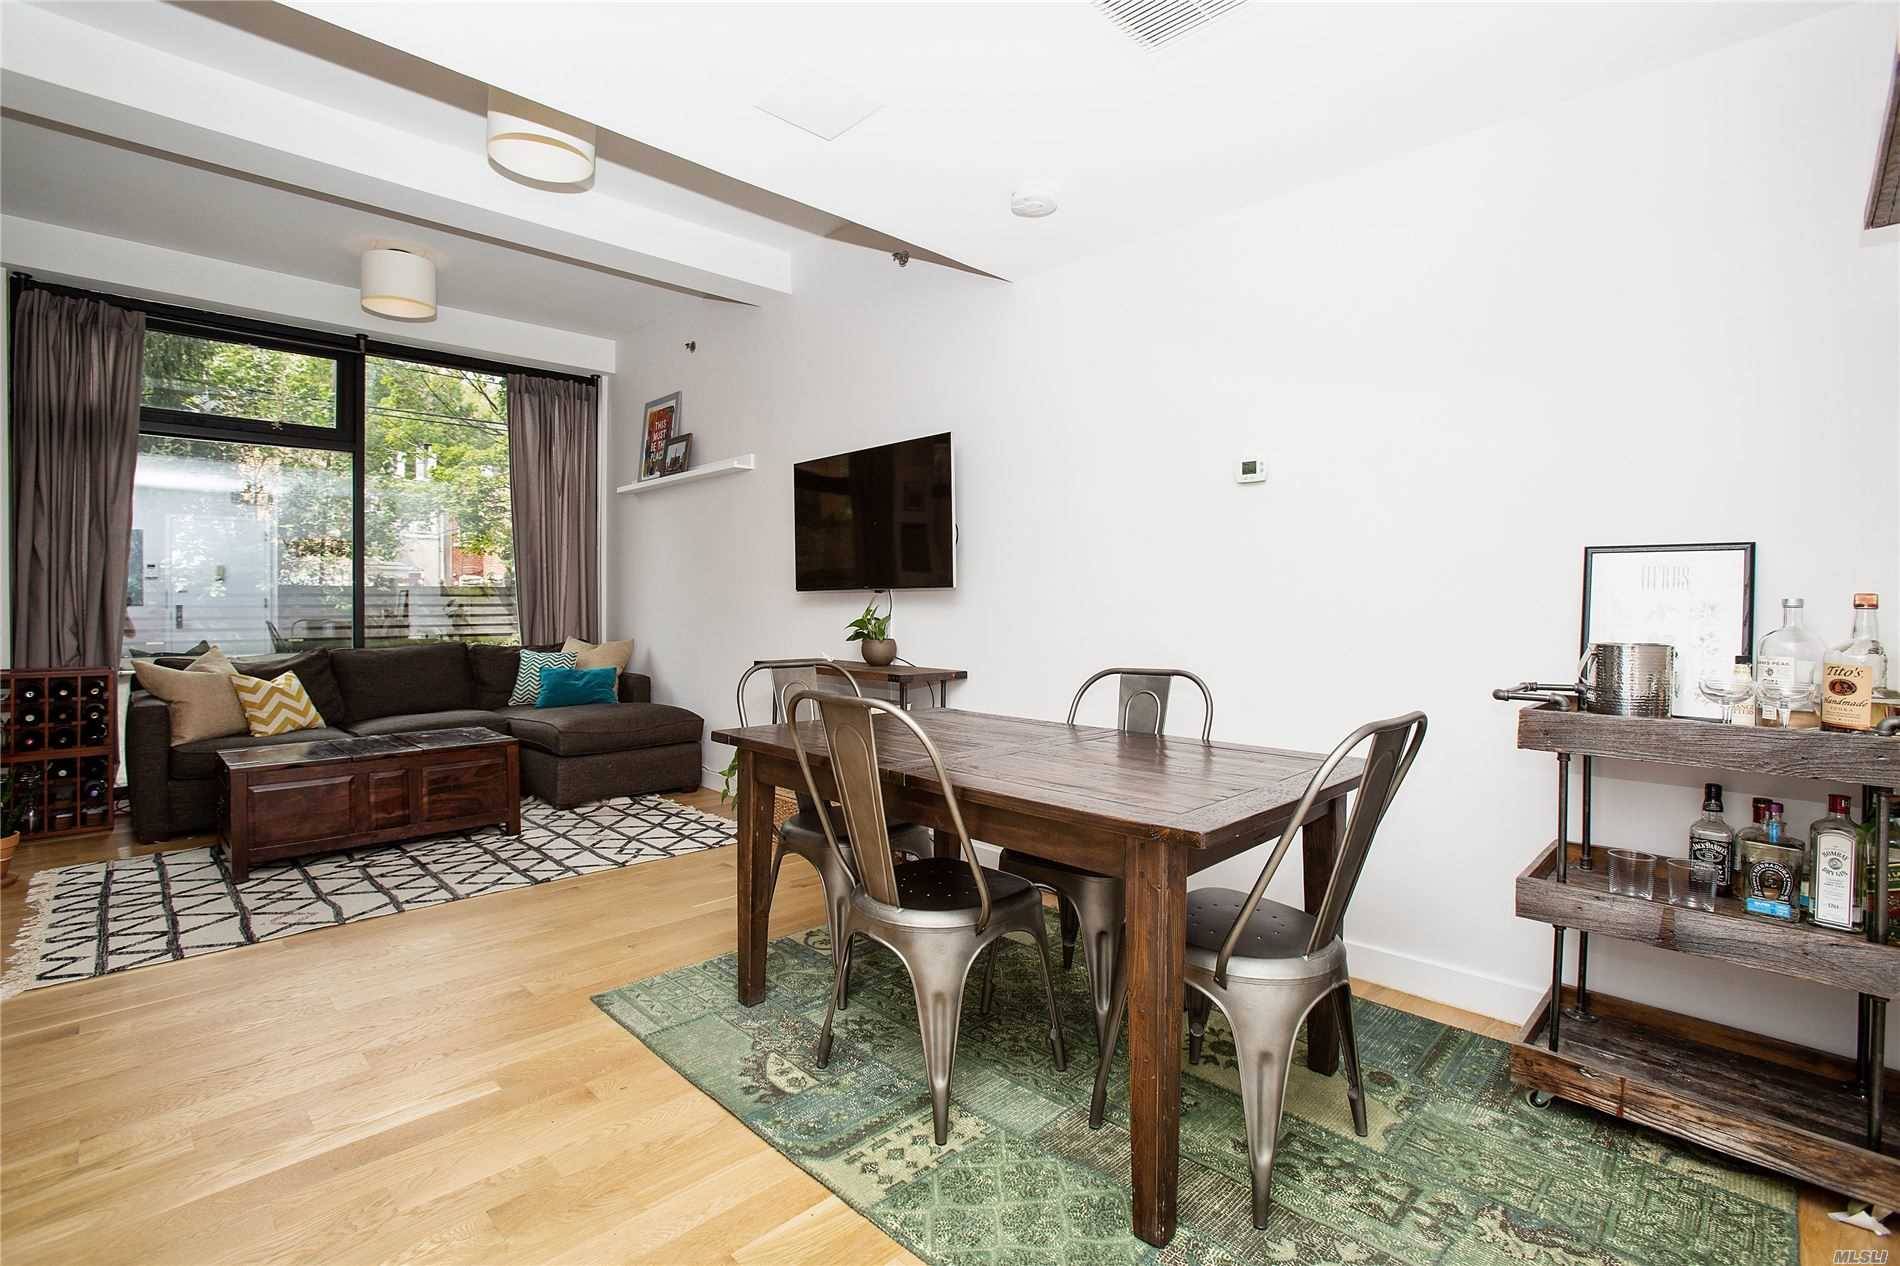 Stunning Spacious modern duplex condo has 2 floors of comfortable living in Greenpoint BK.